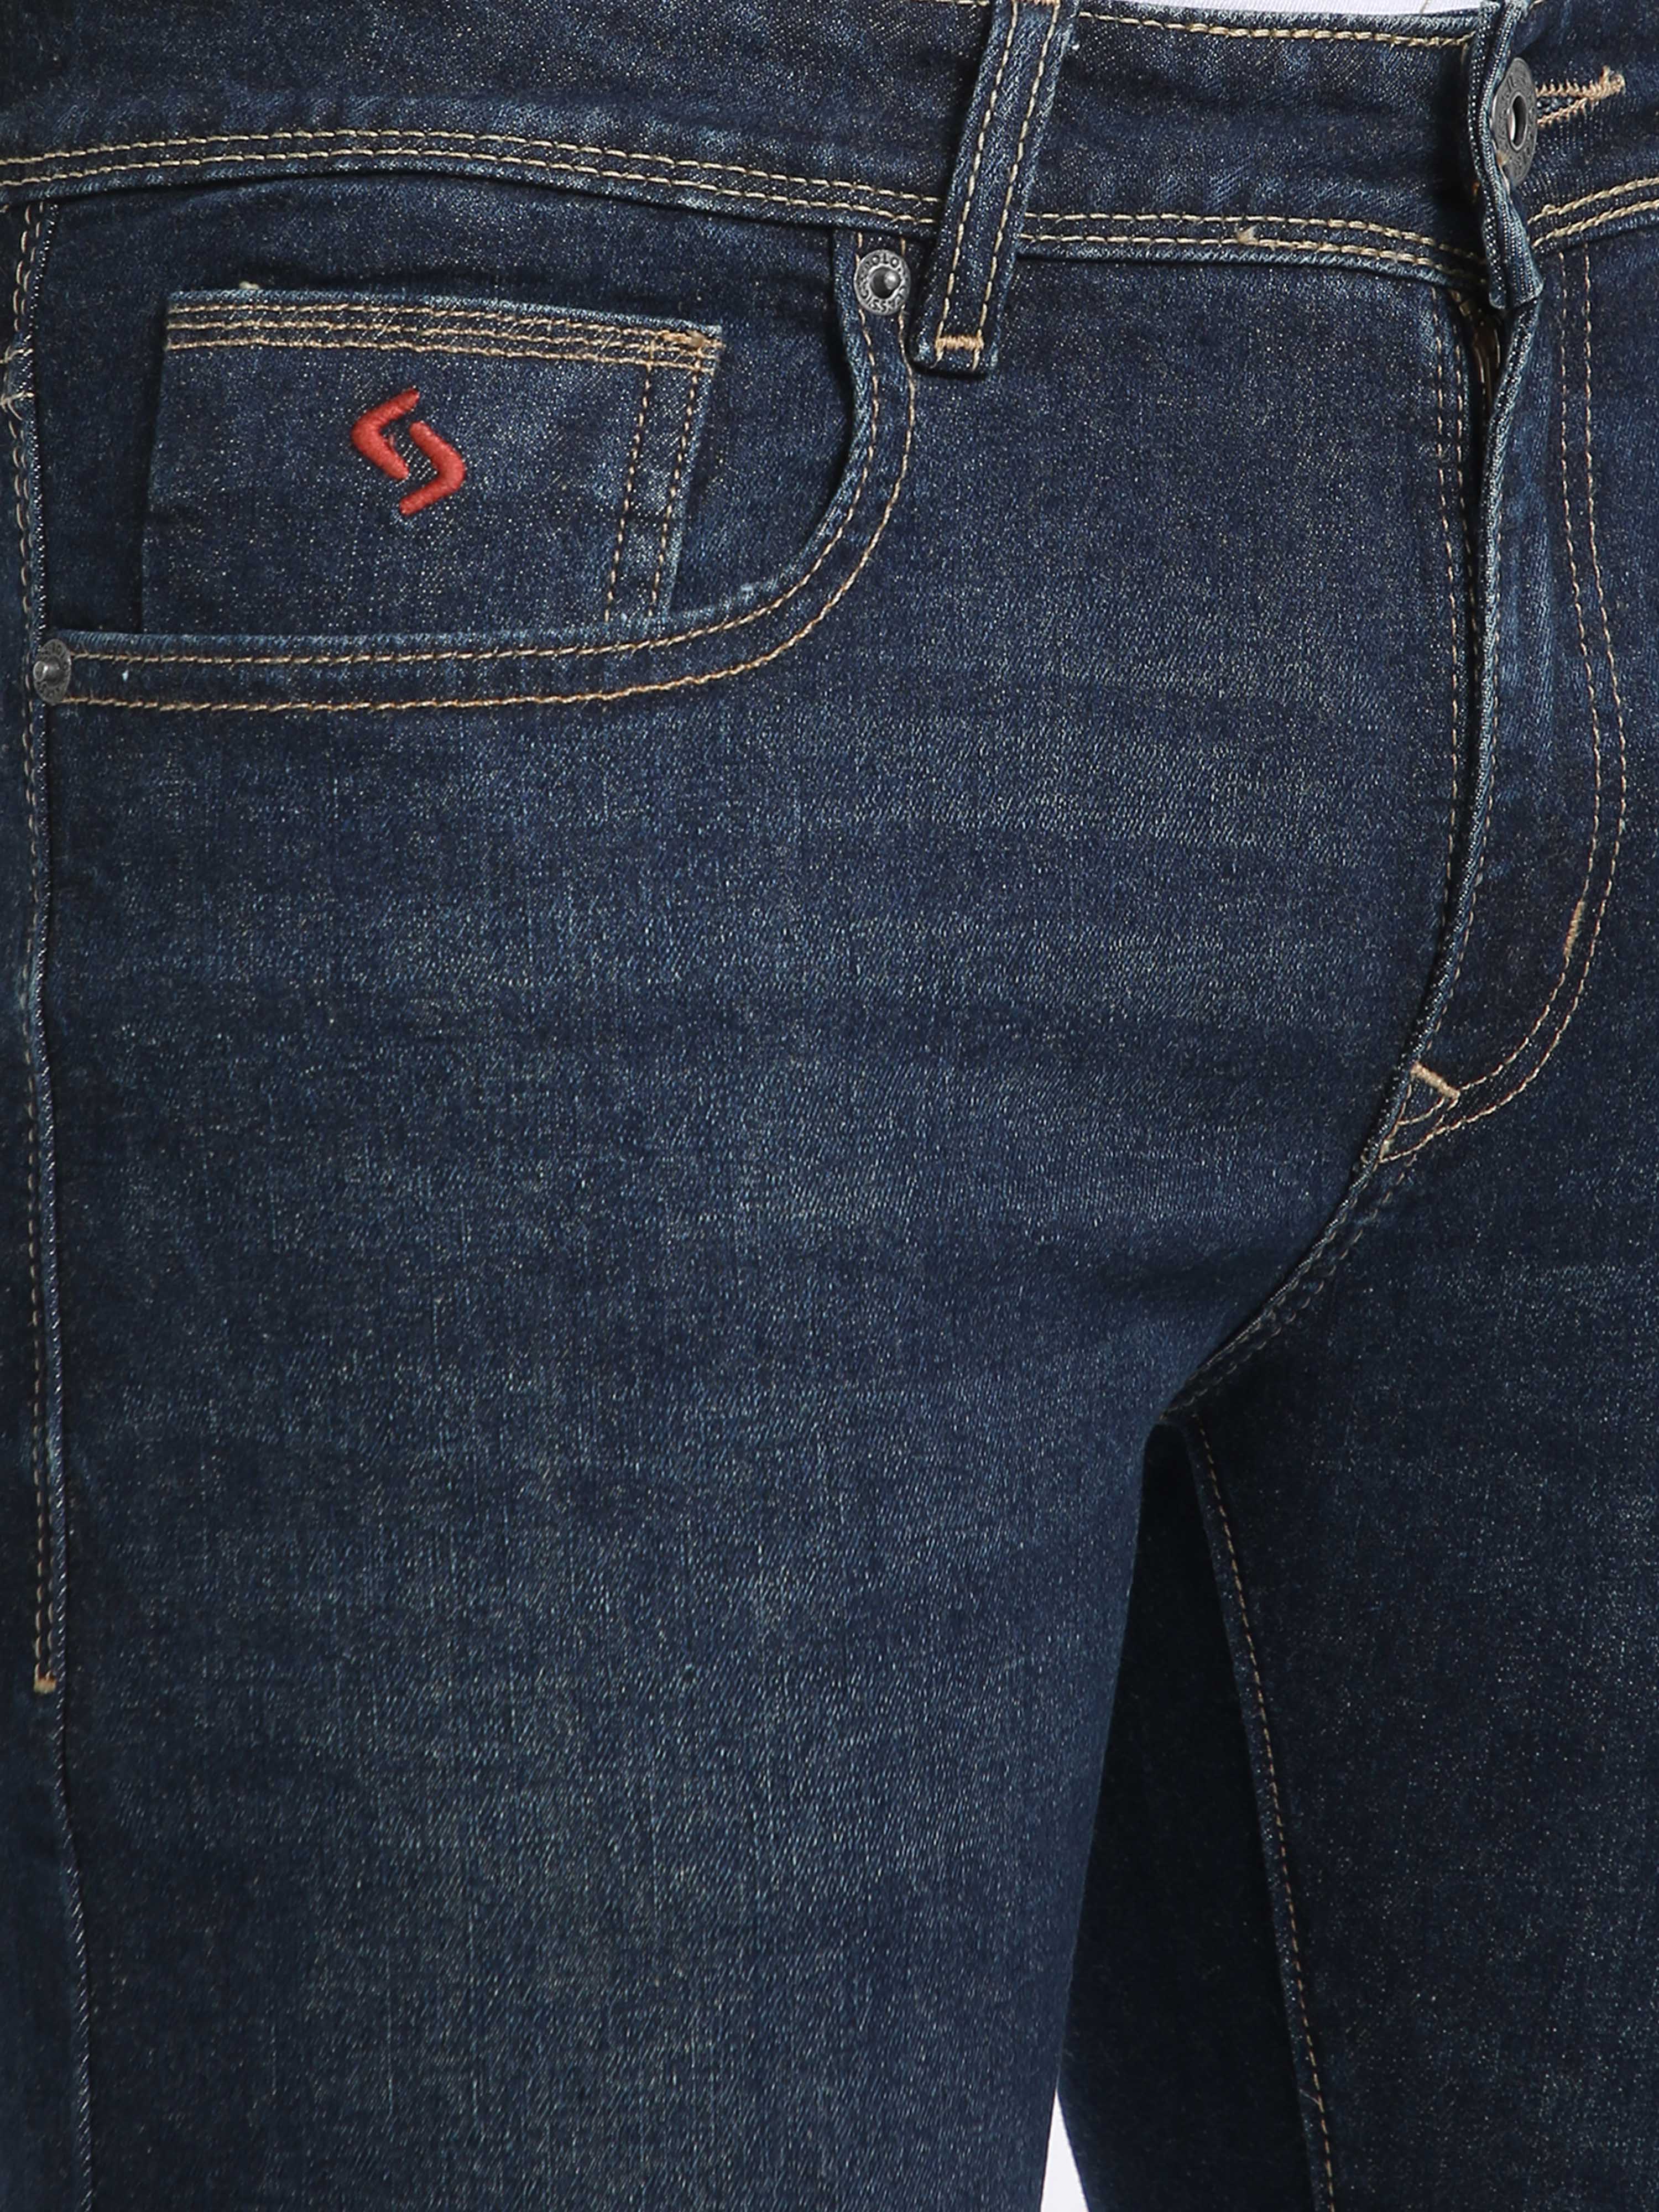 Classic Polo Men's Slim Fit Cotton Denim | CPDO2-29 NVY-SF-LY